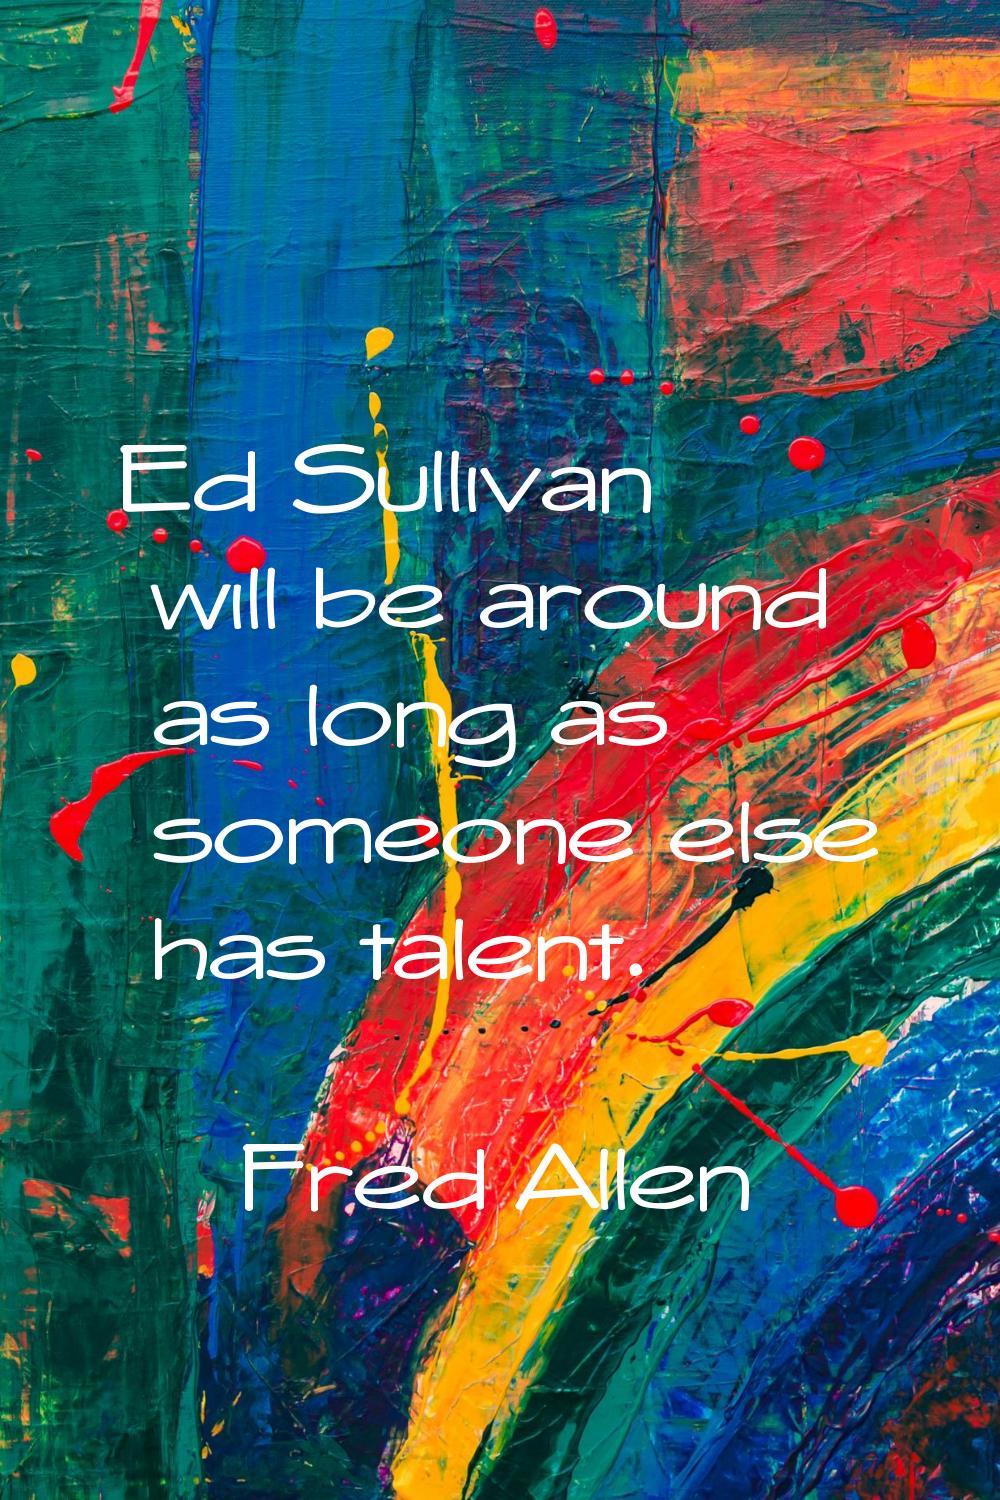 Ed Sullivan will be around as long as someone else has talent.